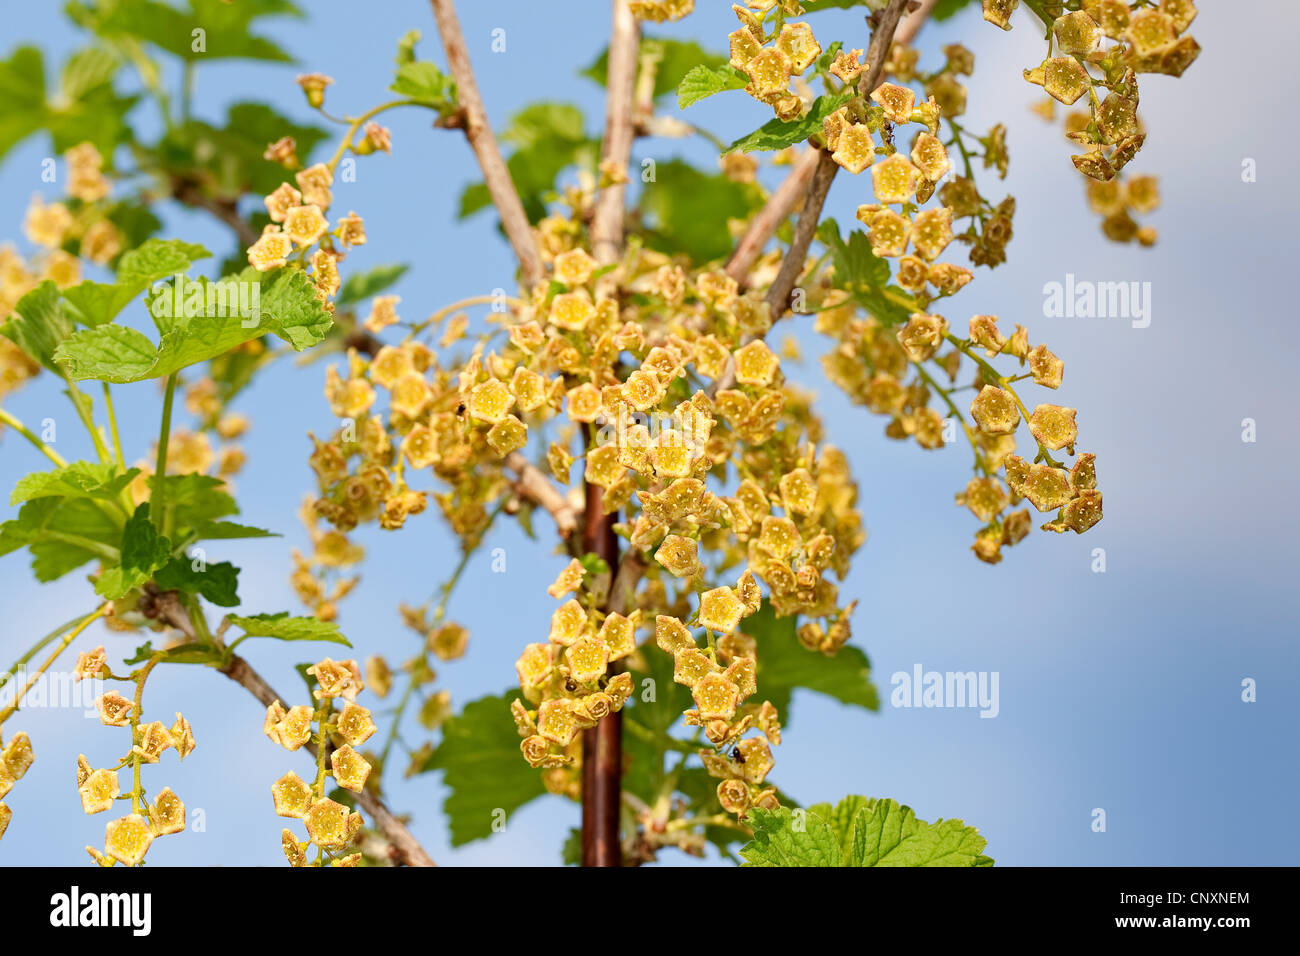 northern red currant (Ribes rubrum), blooming, Germany Stock Photo